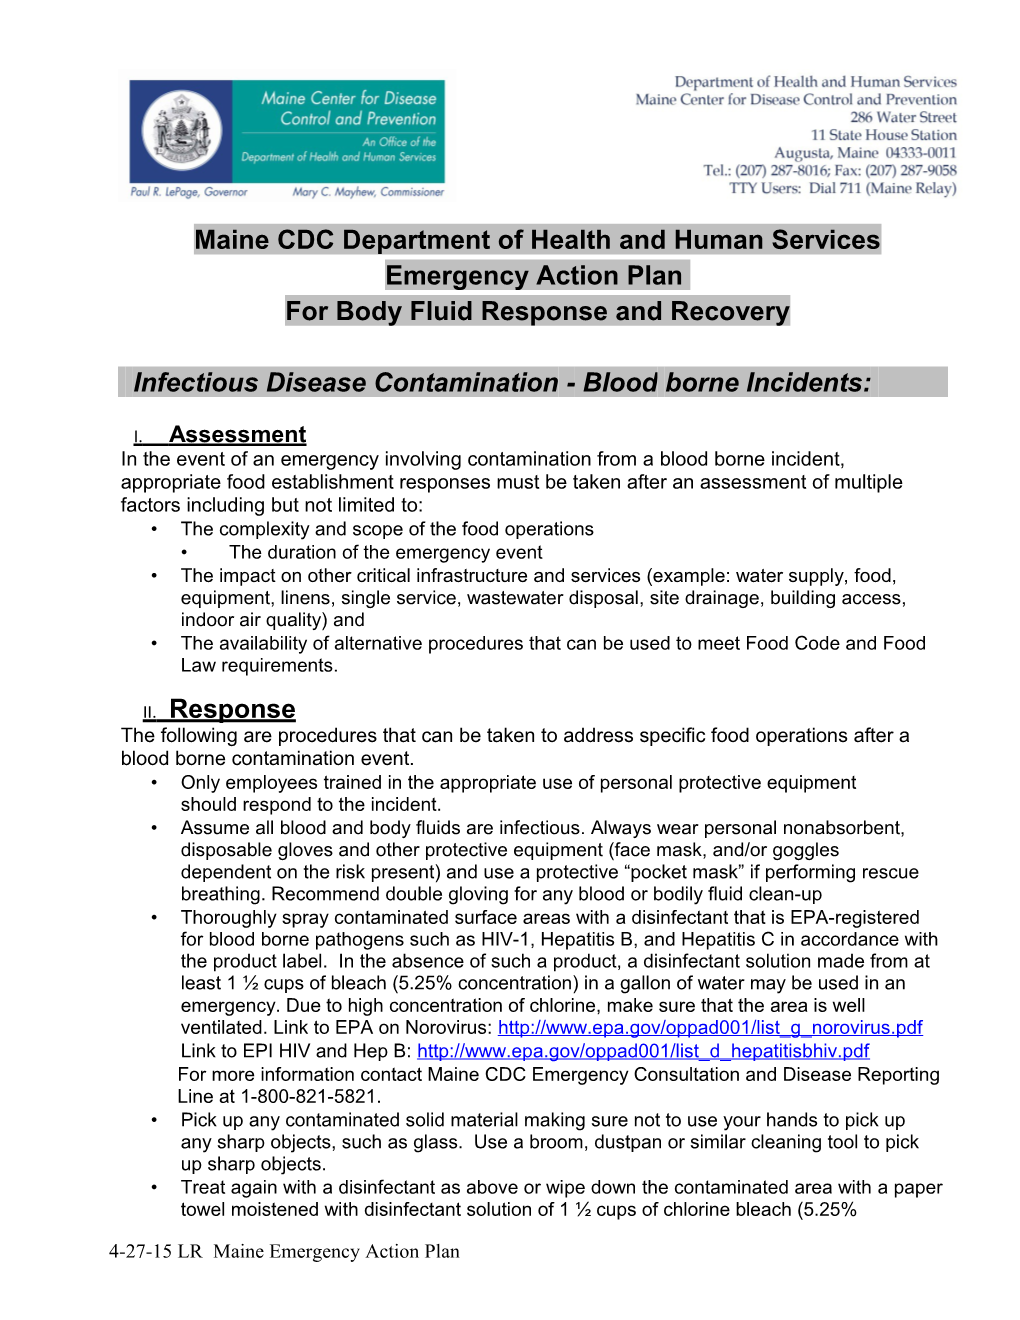 Maine CDC Department of Health and Human Services